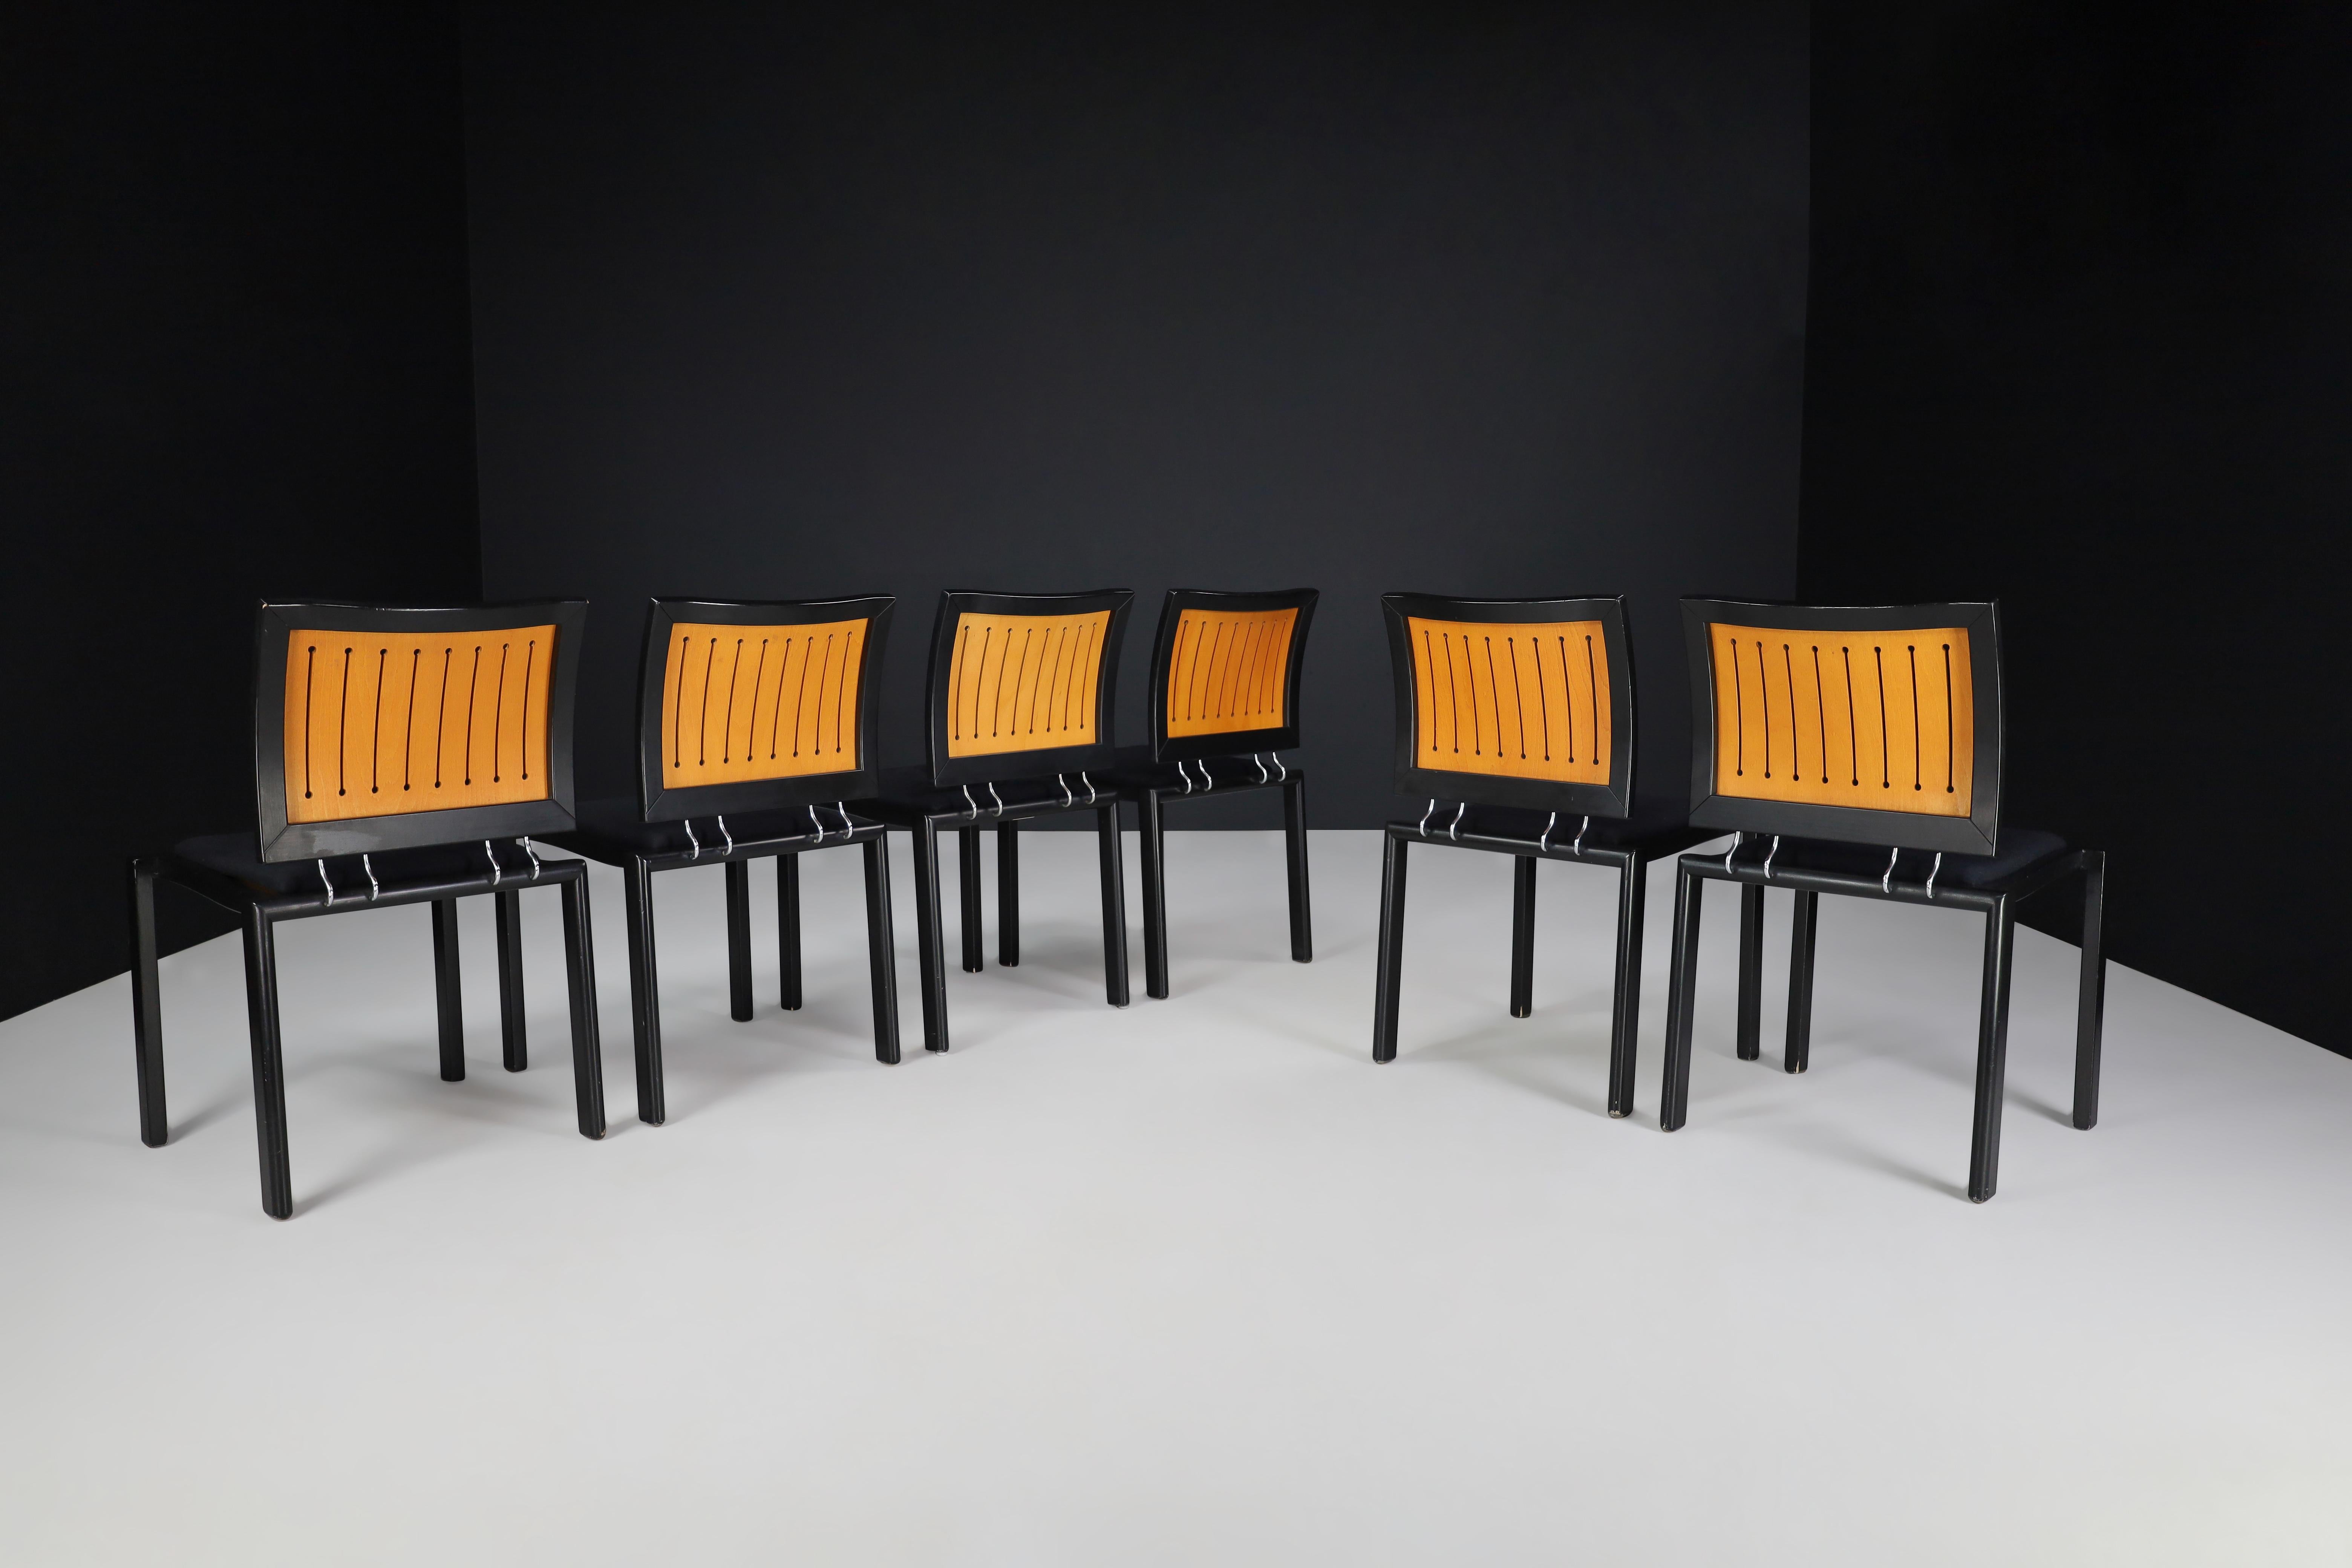 Quadro Chairs by Bruno Rey & Charles Polin for Dietiker, Switzerland, 1980s In Good Condition For Sale In Almelo, NL